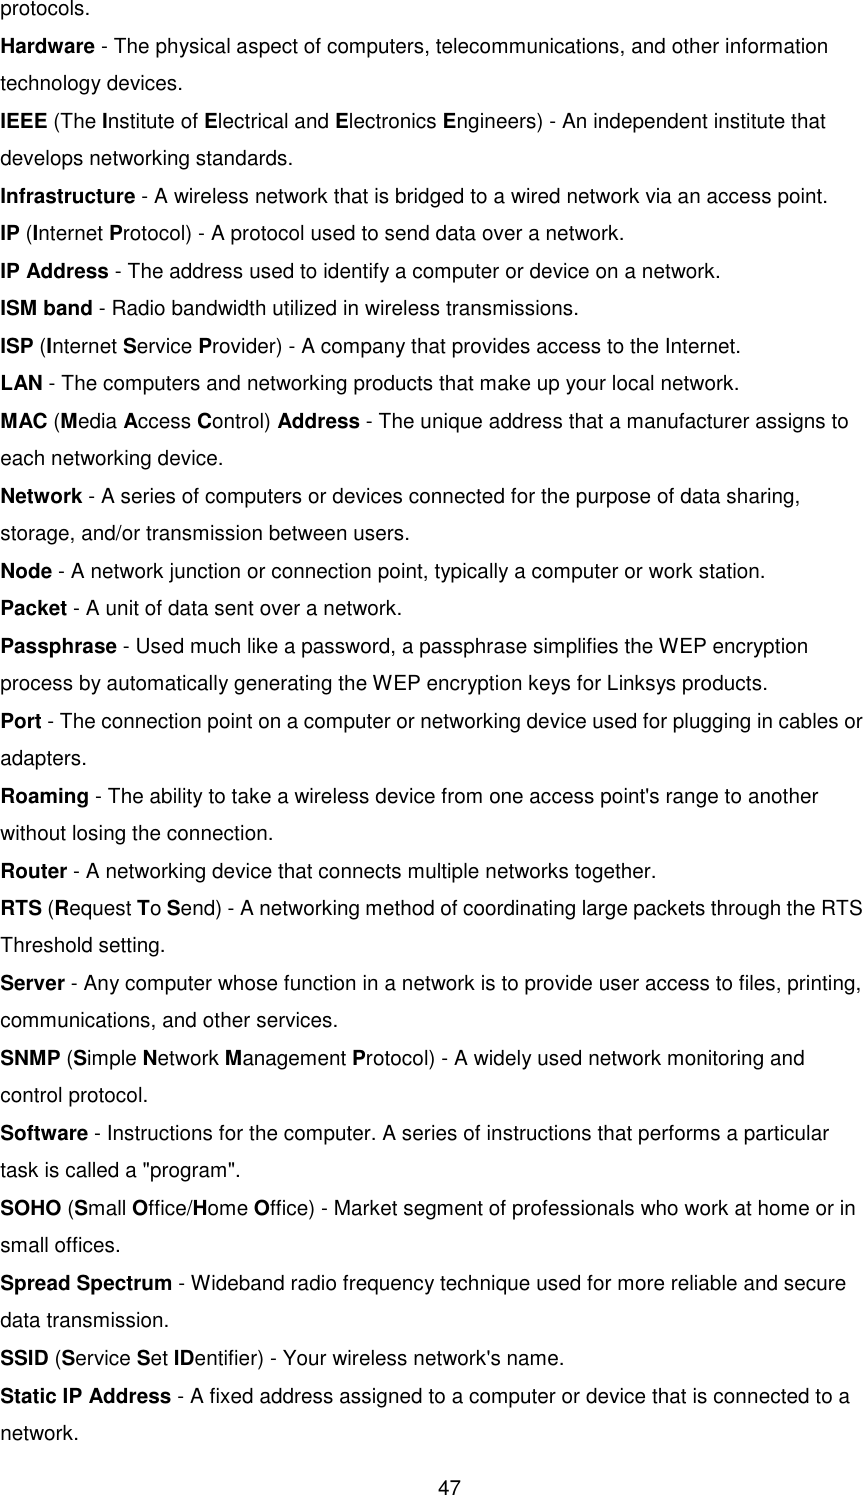  47 protocols. Hardware - The physical aspect of computers, telecommunications, and other information technology devices. IEEE (The Institute of Electrical and Electronics Engineers) - An independent institute that develops networking standards. Infrastructure - A wireless network that is bridged to a wired network via an access point. IP (Internet Protocol) - A protocol used to send data over a network. IP Address - The address used to identify a computer or device on a network. ISM band - Radio bandwidth utilized in wireless transmissions. ISP (Internet Service Provider) - A company that provides access to the Internet. LAN - The computers and networking products that make up your local network. MAC (Media Access Control) Address - The unique address that a manufacturer assigns to each networking device. Network - A series of computers or devices connected for the purpose of data sharing, storage, and/or transmission between users. Node - A network junction or connection point, typically a computer or work station. Packet - A unit of data sent over a network. Passphrase - Used much like a password, a passphrase simplifies the WEP encryption process by automatically generating the WEP encryption keys for Linksys products. Port - The connection point on a computer or networking device used for plugging in cables or adapters. Roaming - The ability to take a wireless device from one access point&apos;s range to another without losing the connection. Router - A networking device that connects multiple networks together. RTS (Request To Send) - A networking method of coordinating large packets through the RTS Threshold setting. Server - Any computer whose function in a network is to provide user access to files, printing, communications, and other services. SNMP (Simple Network Management Protocol) - A widely used network monitoring and control protocol. Software - Instructions for the computer. A series of instructions that performs a particular task is called a &quot;program&quot;. SOHO (Small Office/Home Office) - Market segment of professionals who work at home or in small offices. Spread Spectrum - Wideband radio frequency technique used for more reliable and secure data transmission. SSID (Service Set IDentifier) - Your wireless network&apos;s name. Static IP Address - A fixed address assigned to a computer or device that is connected to a network. 